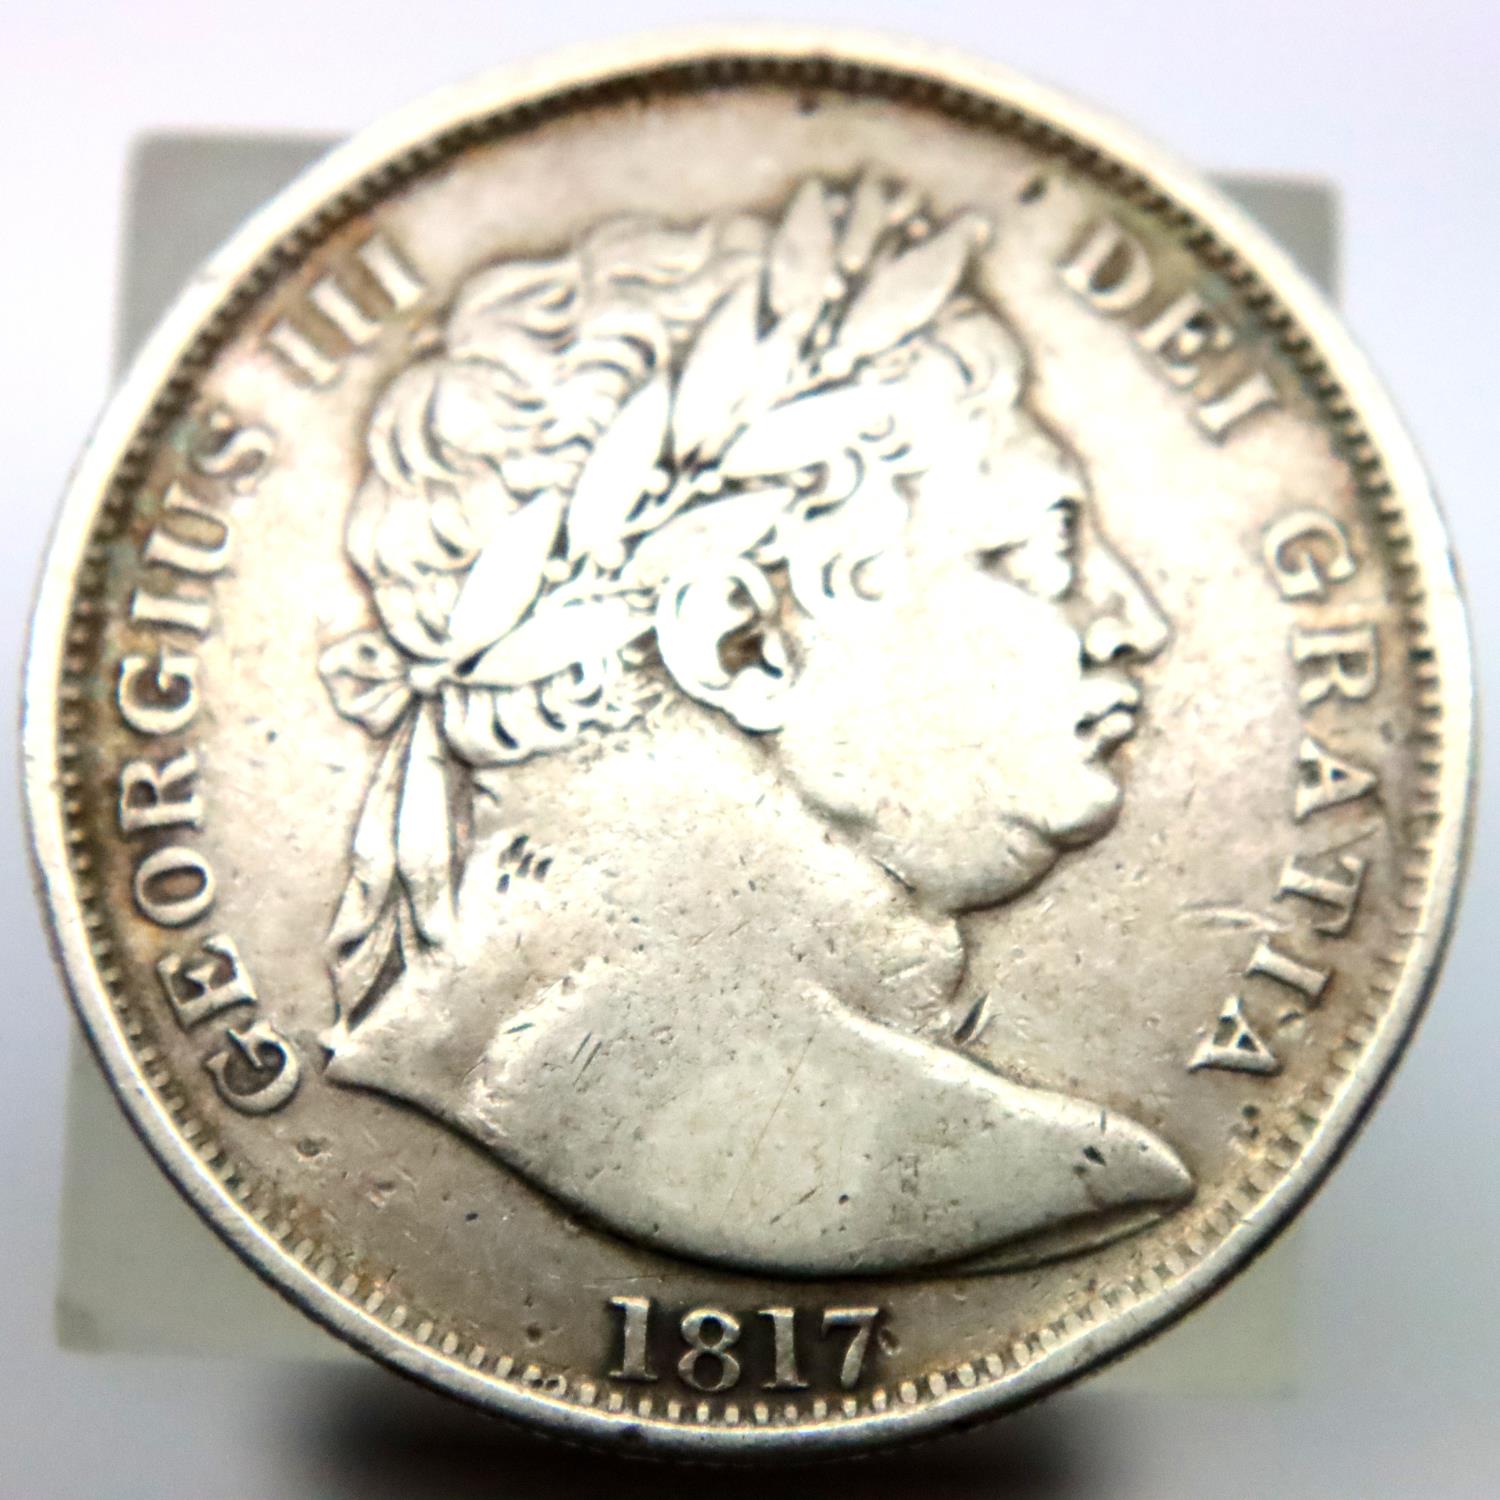 1817 crown of George III. P&P Group 1 (£14+VAT for the first lot and £1+VAT for subsequent lots)